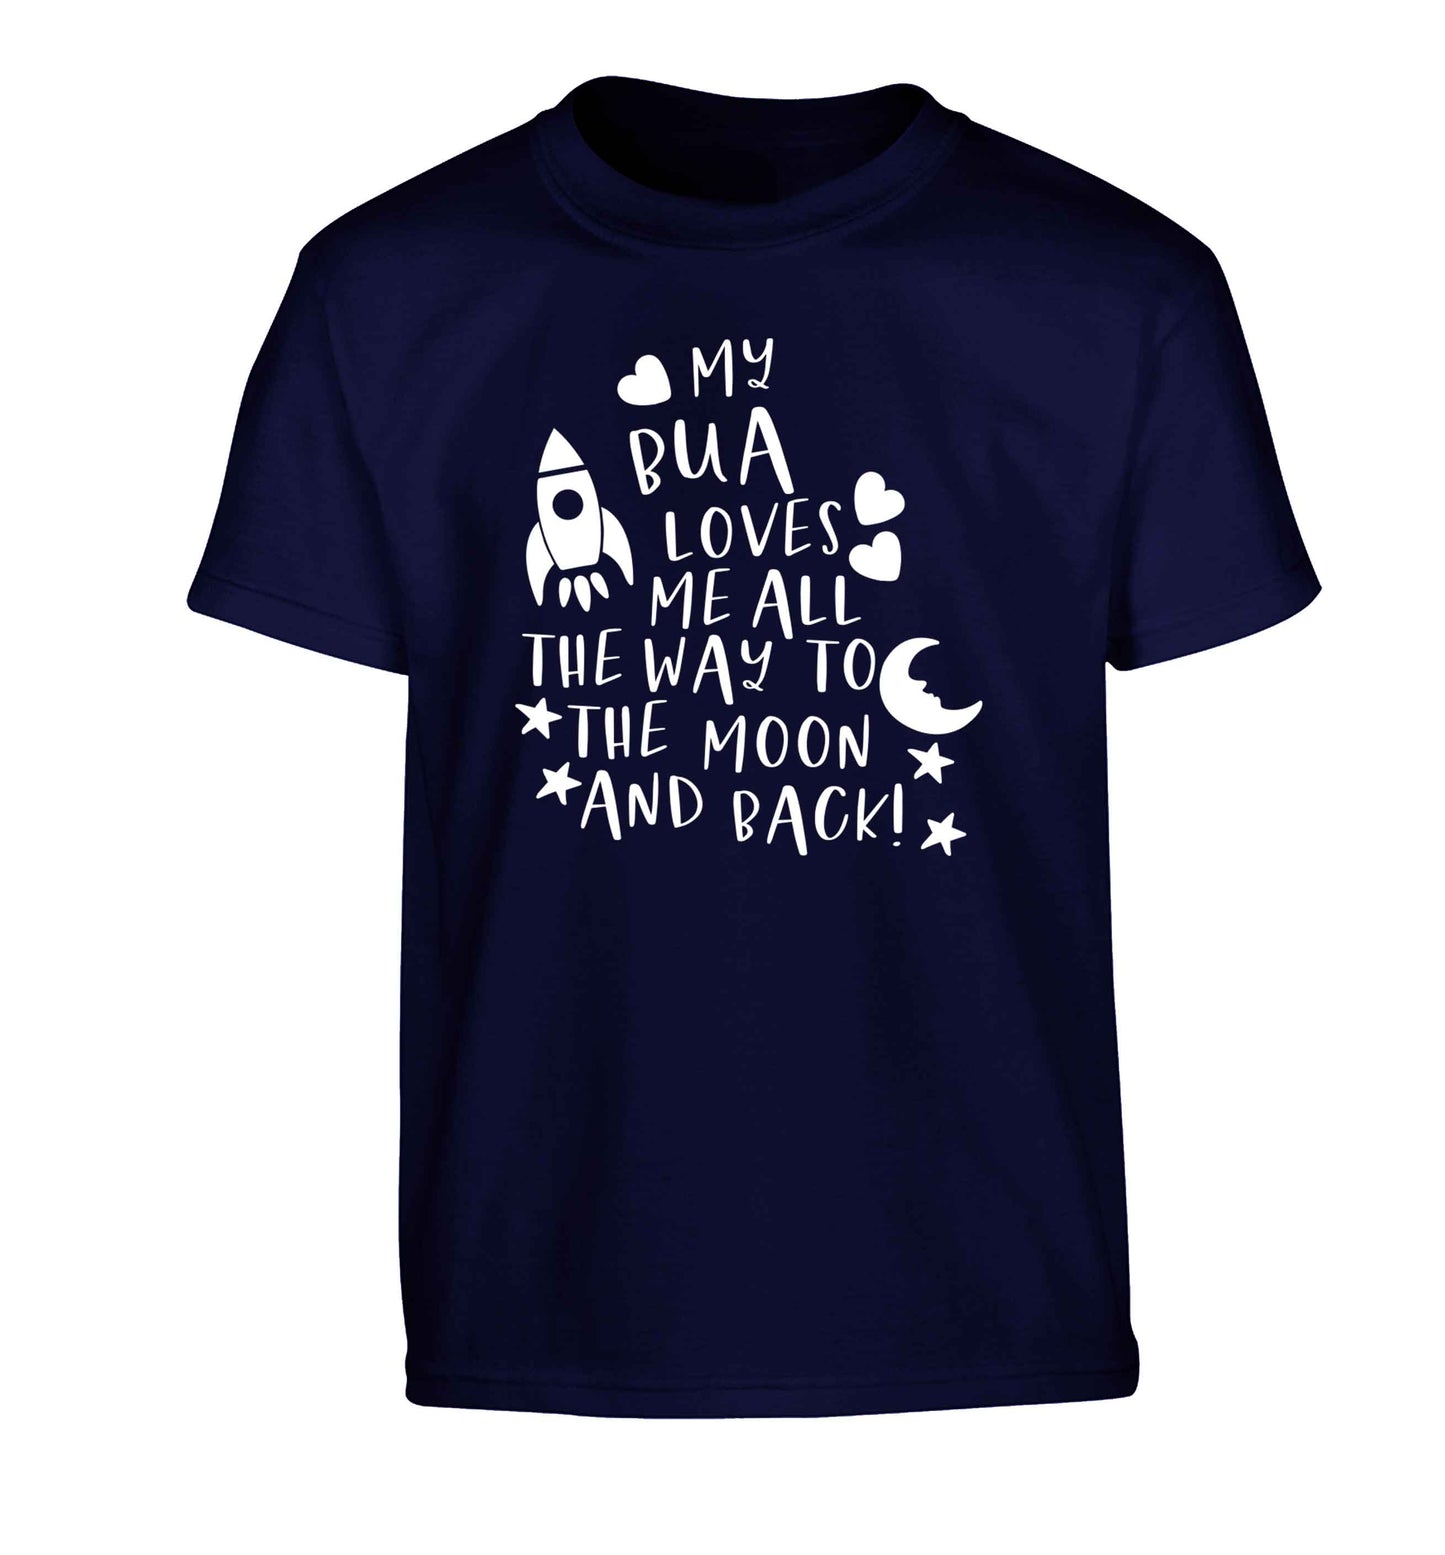 My bua loves me all they way to the moon and back Children's navy Tshirt 12-13 Years